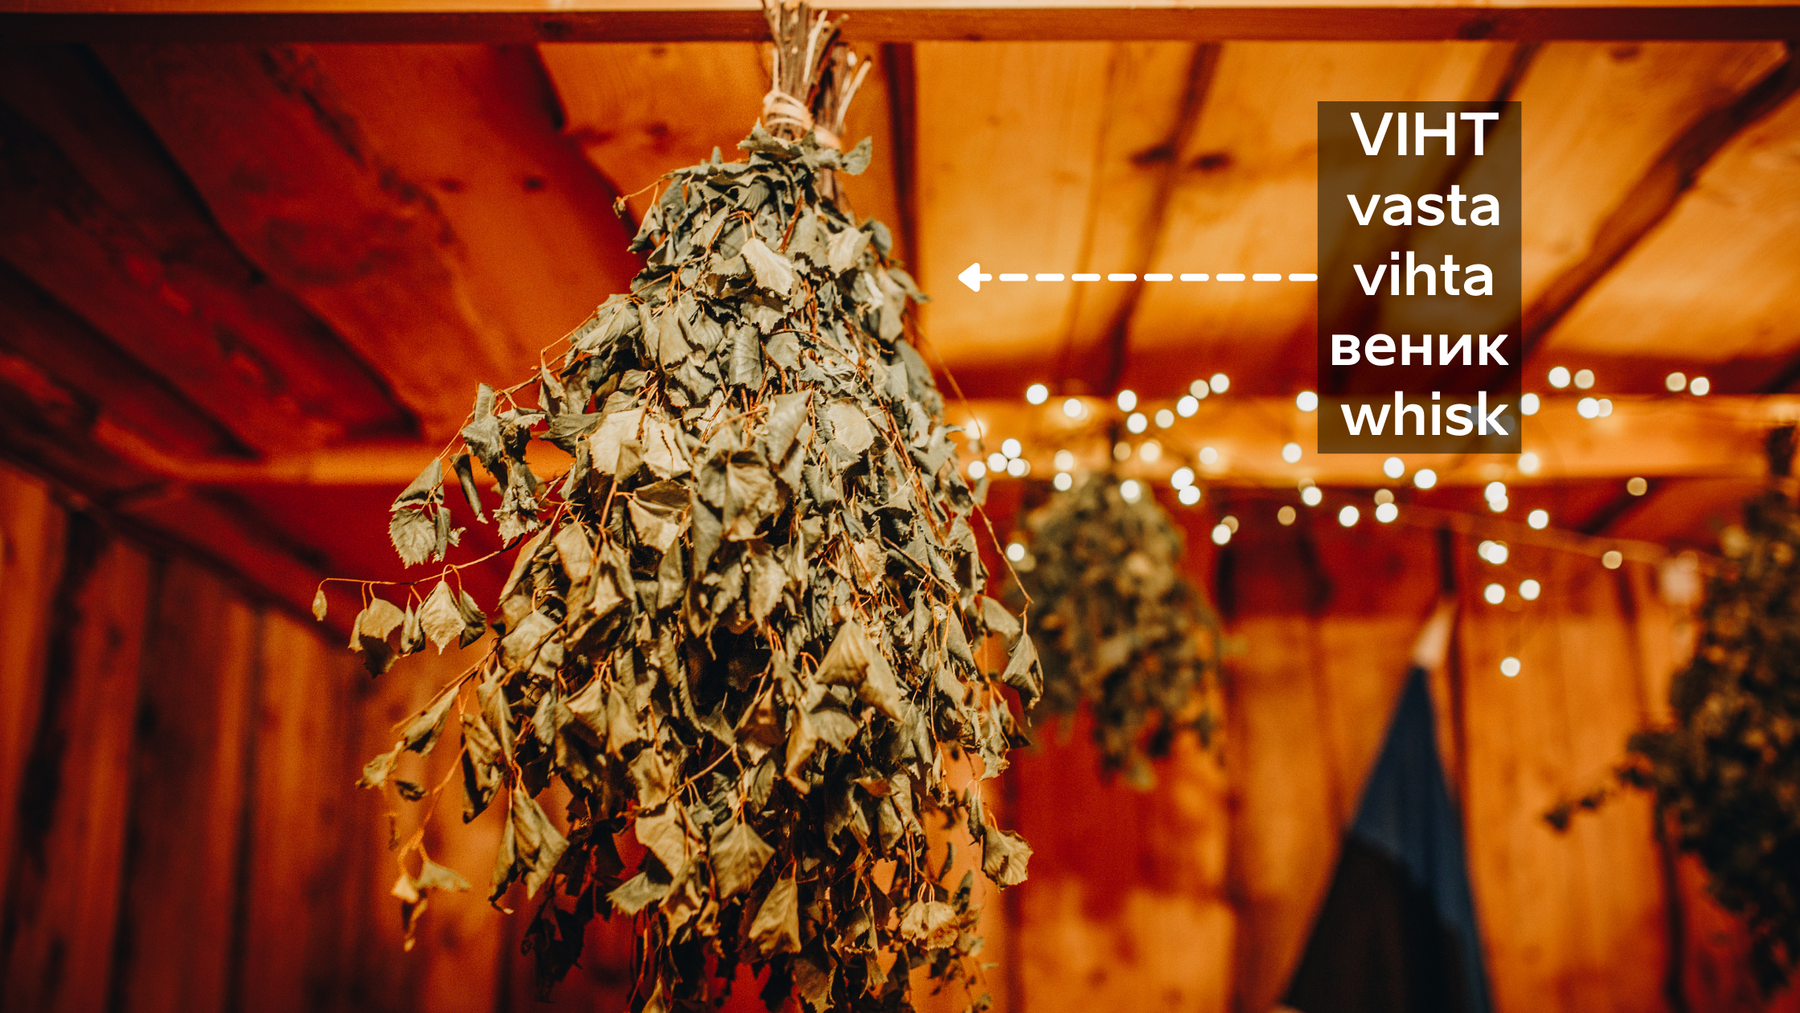 Sauna Rituals: Traditional Practices, Including Use of Vihta (Birch Branches)